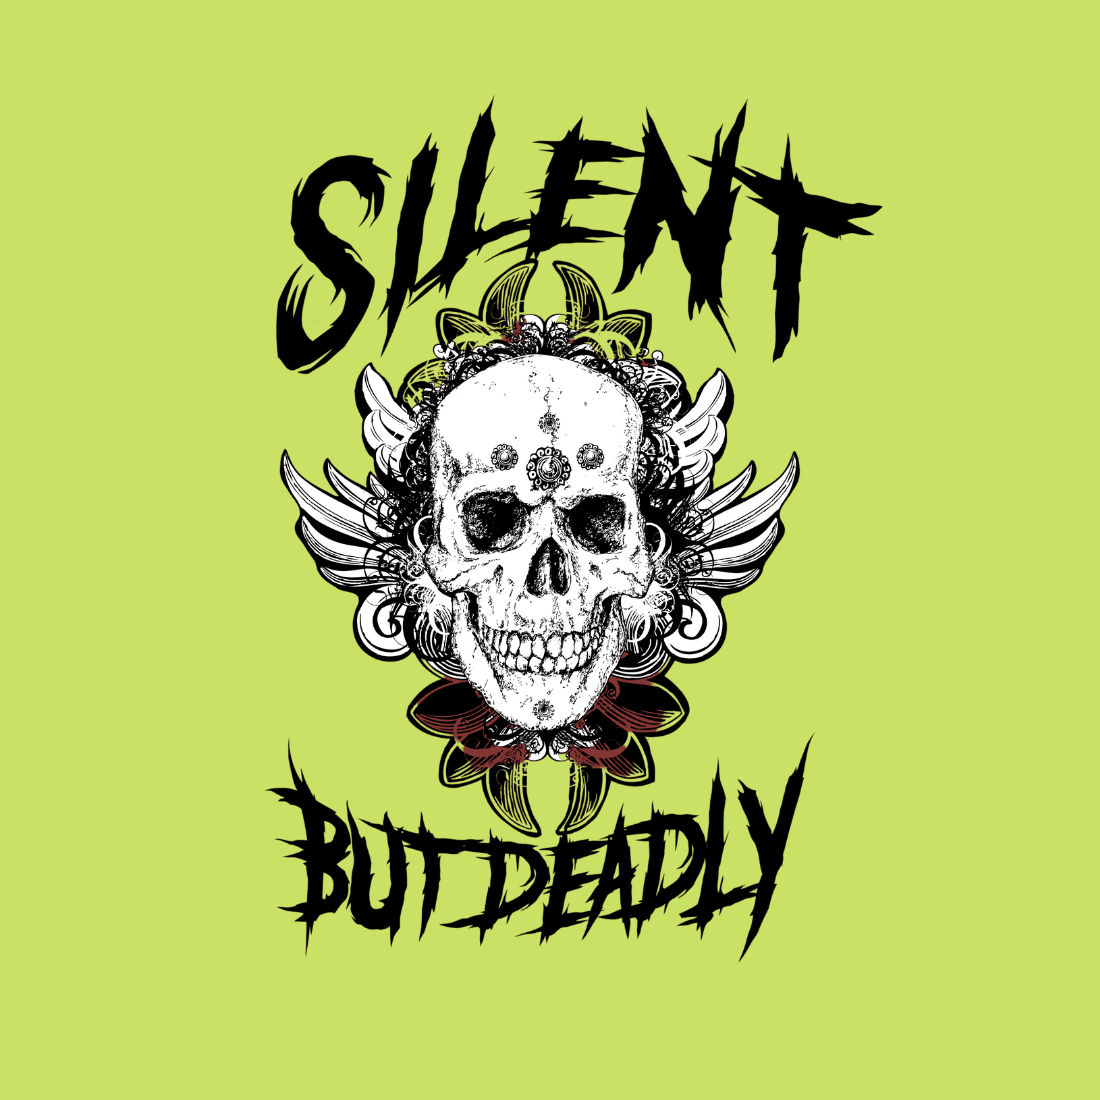 Free Skull T-shirts Design cover image.